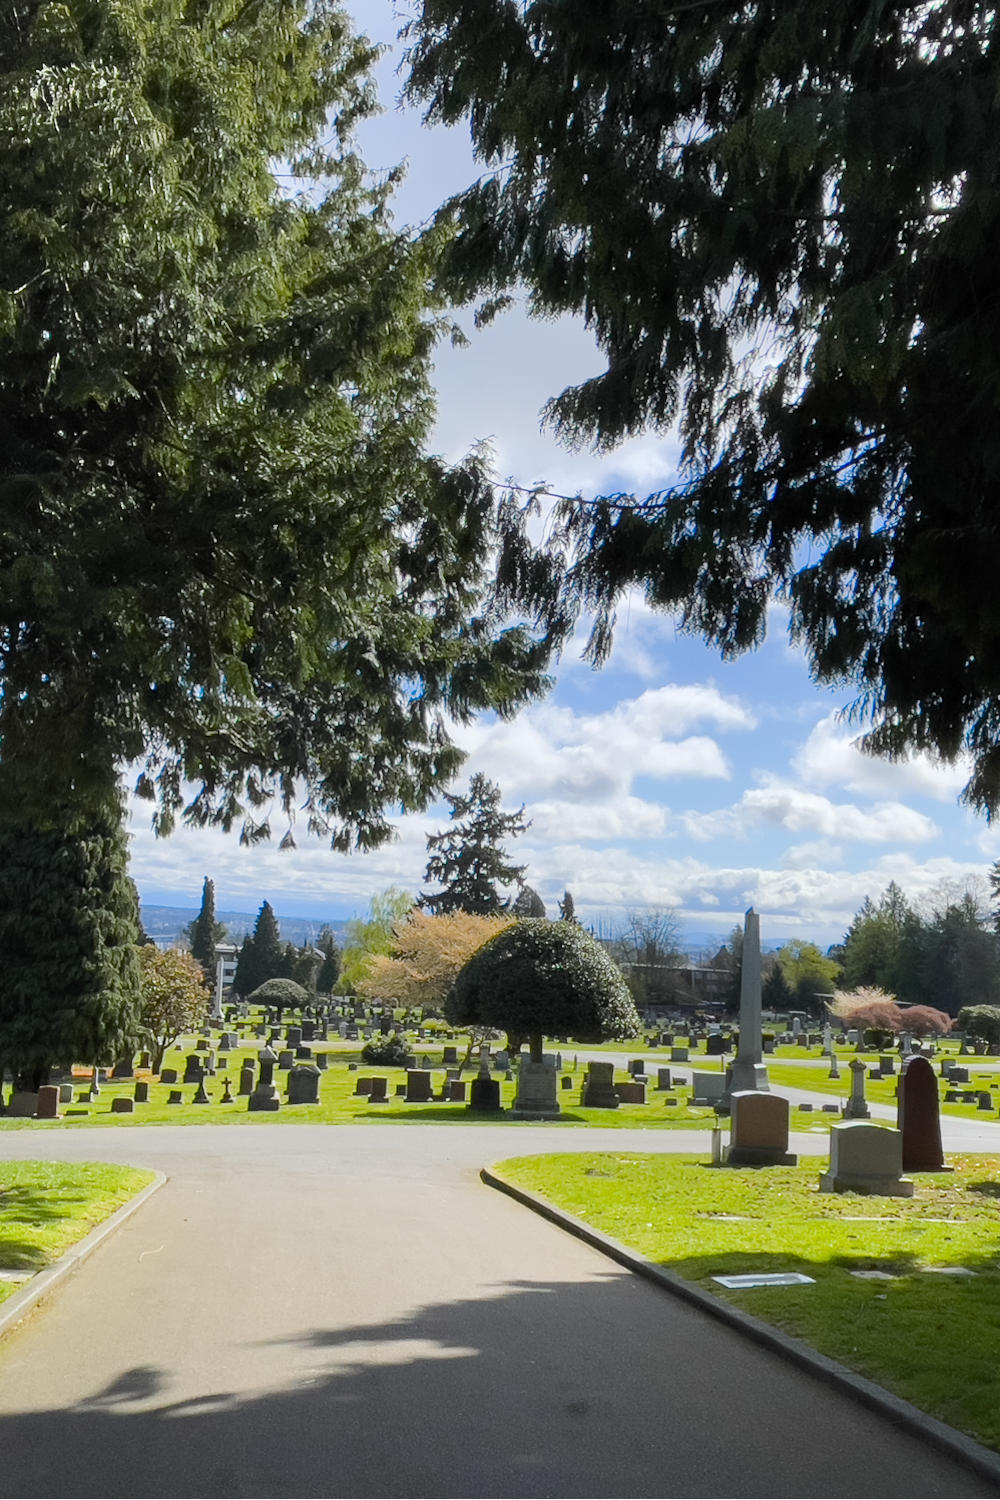 shade trees throughout cemetery